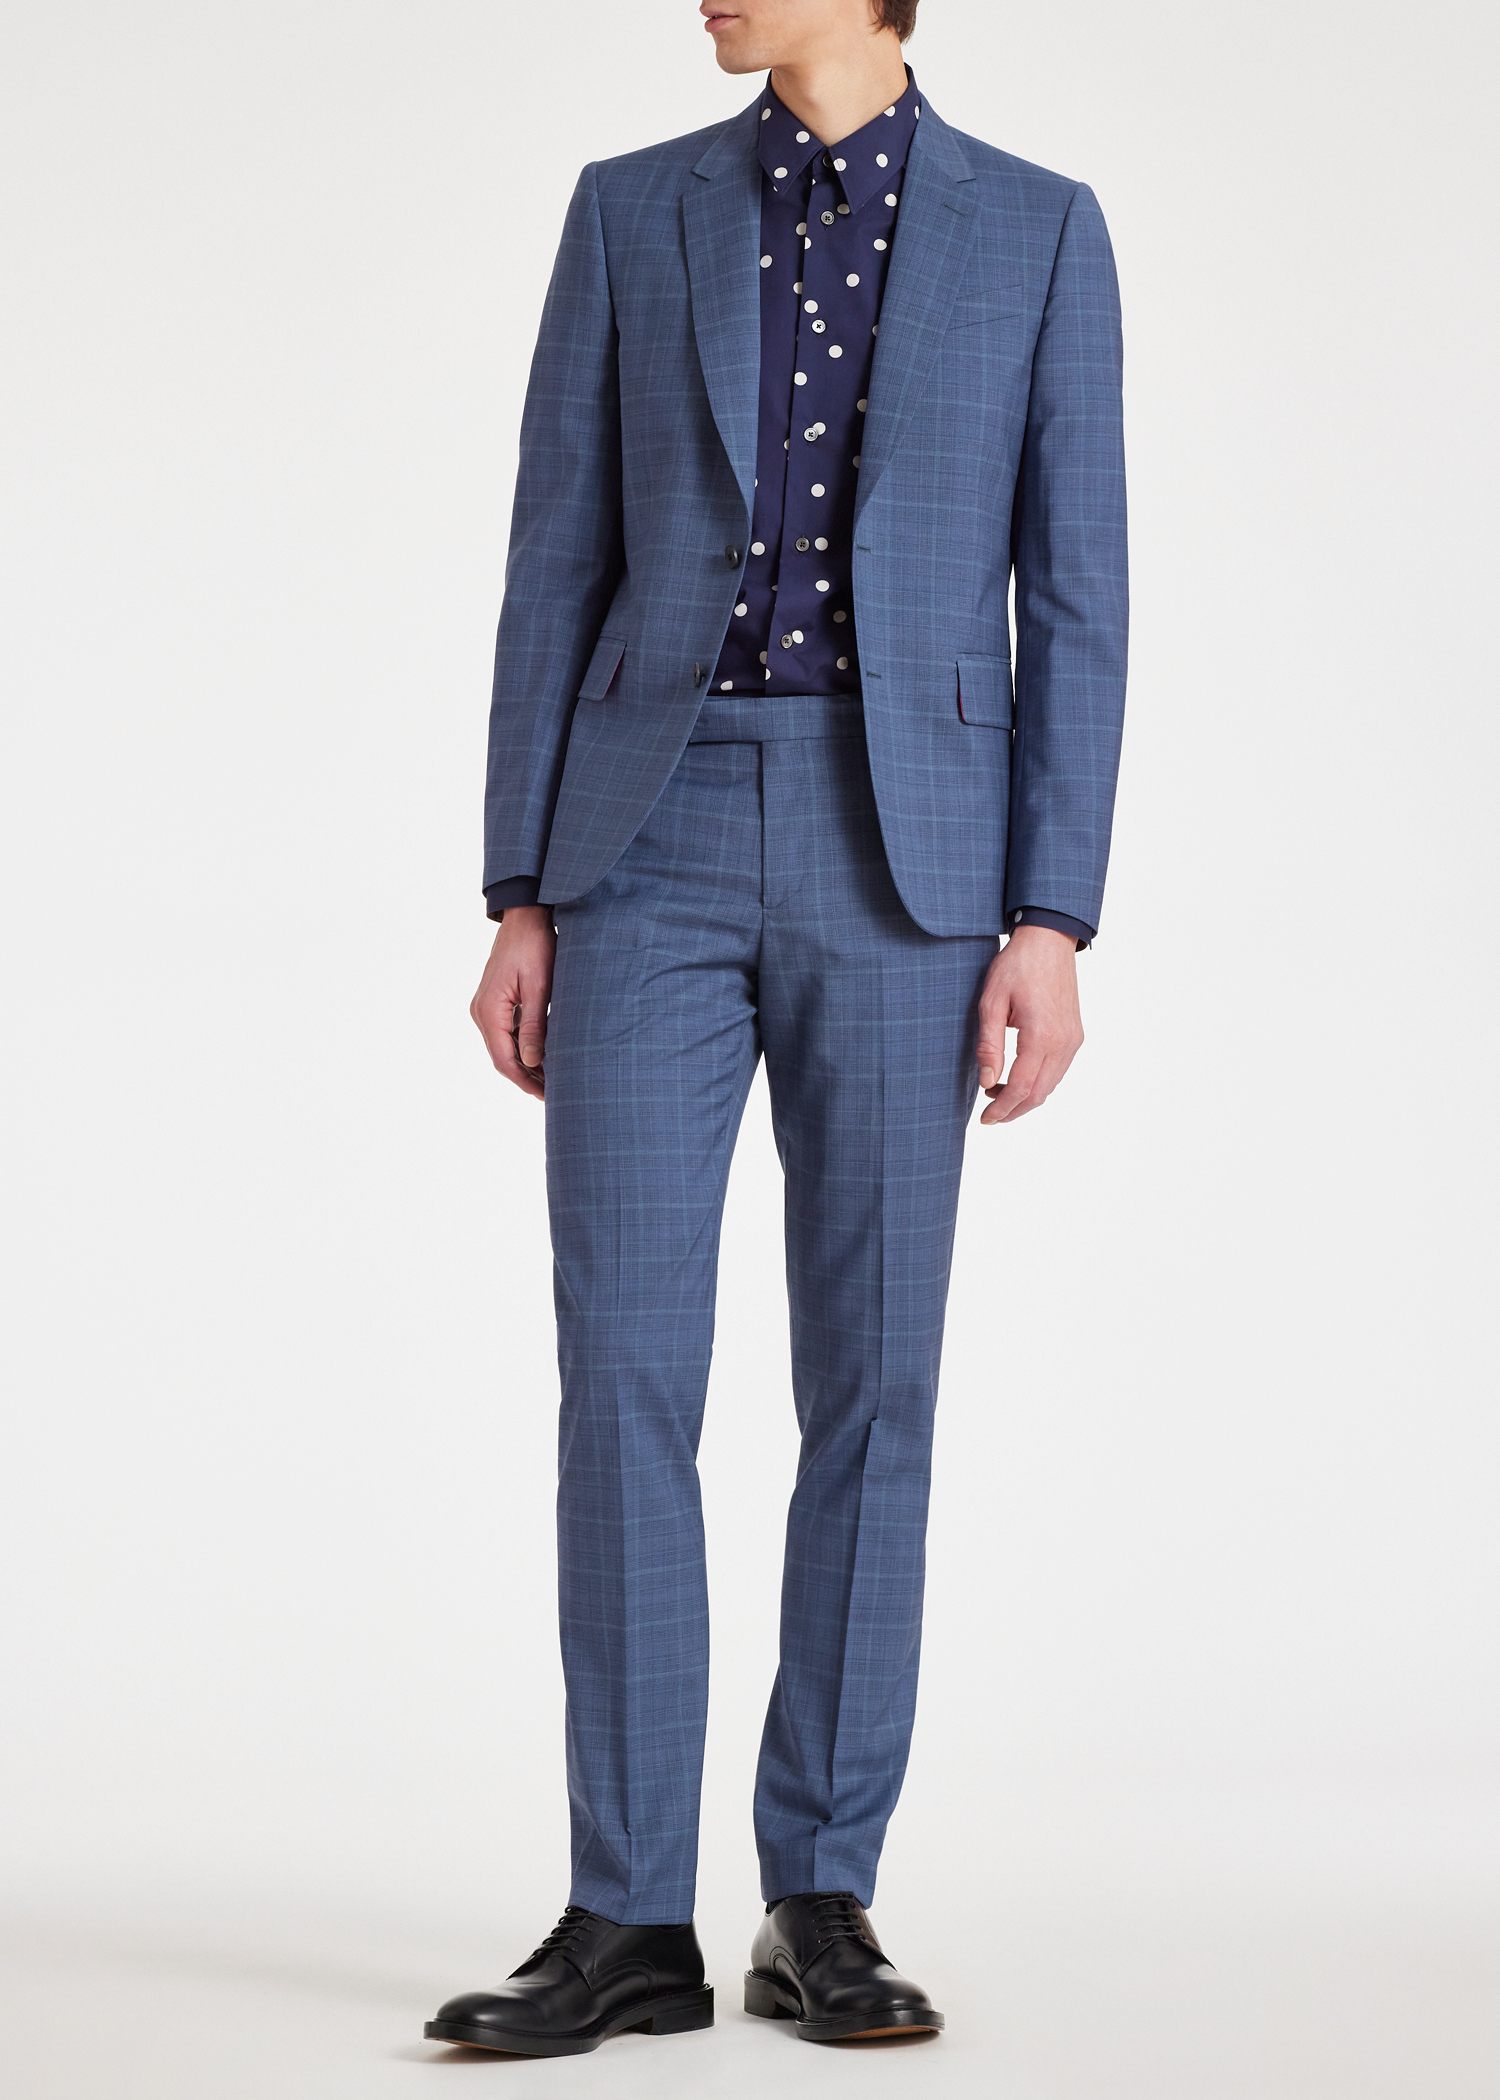 The Soho - Tailored-Fit Blue Check Wool Suit